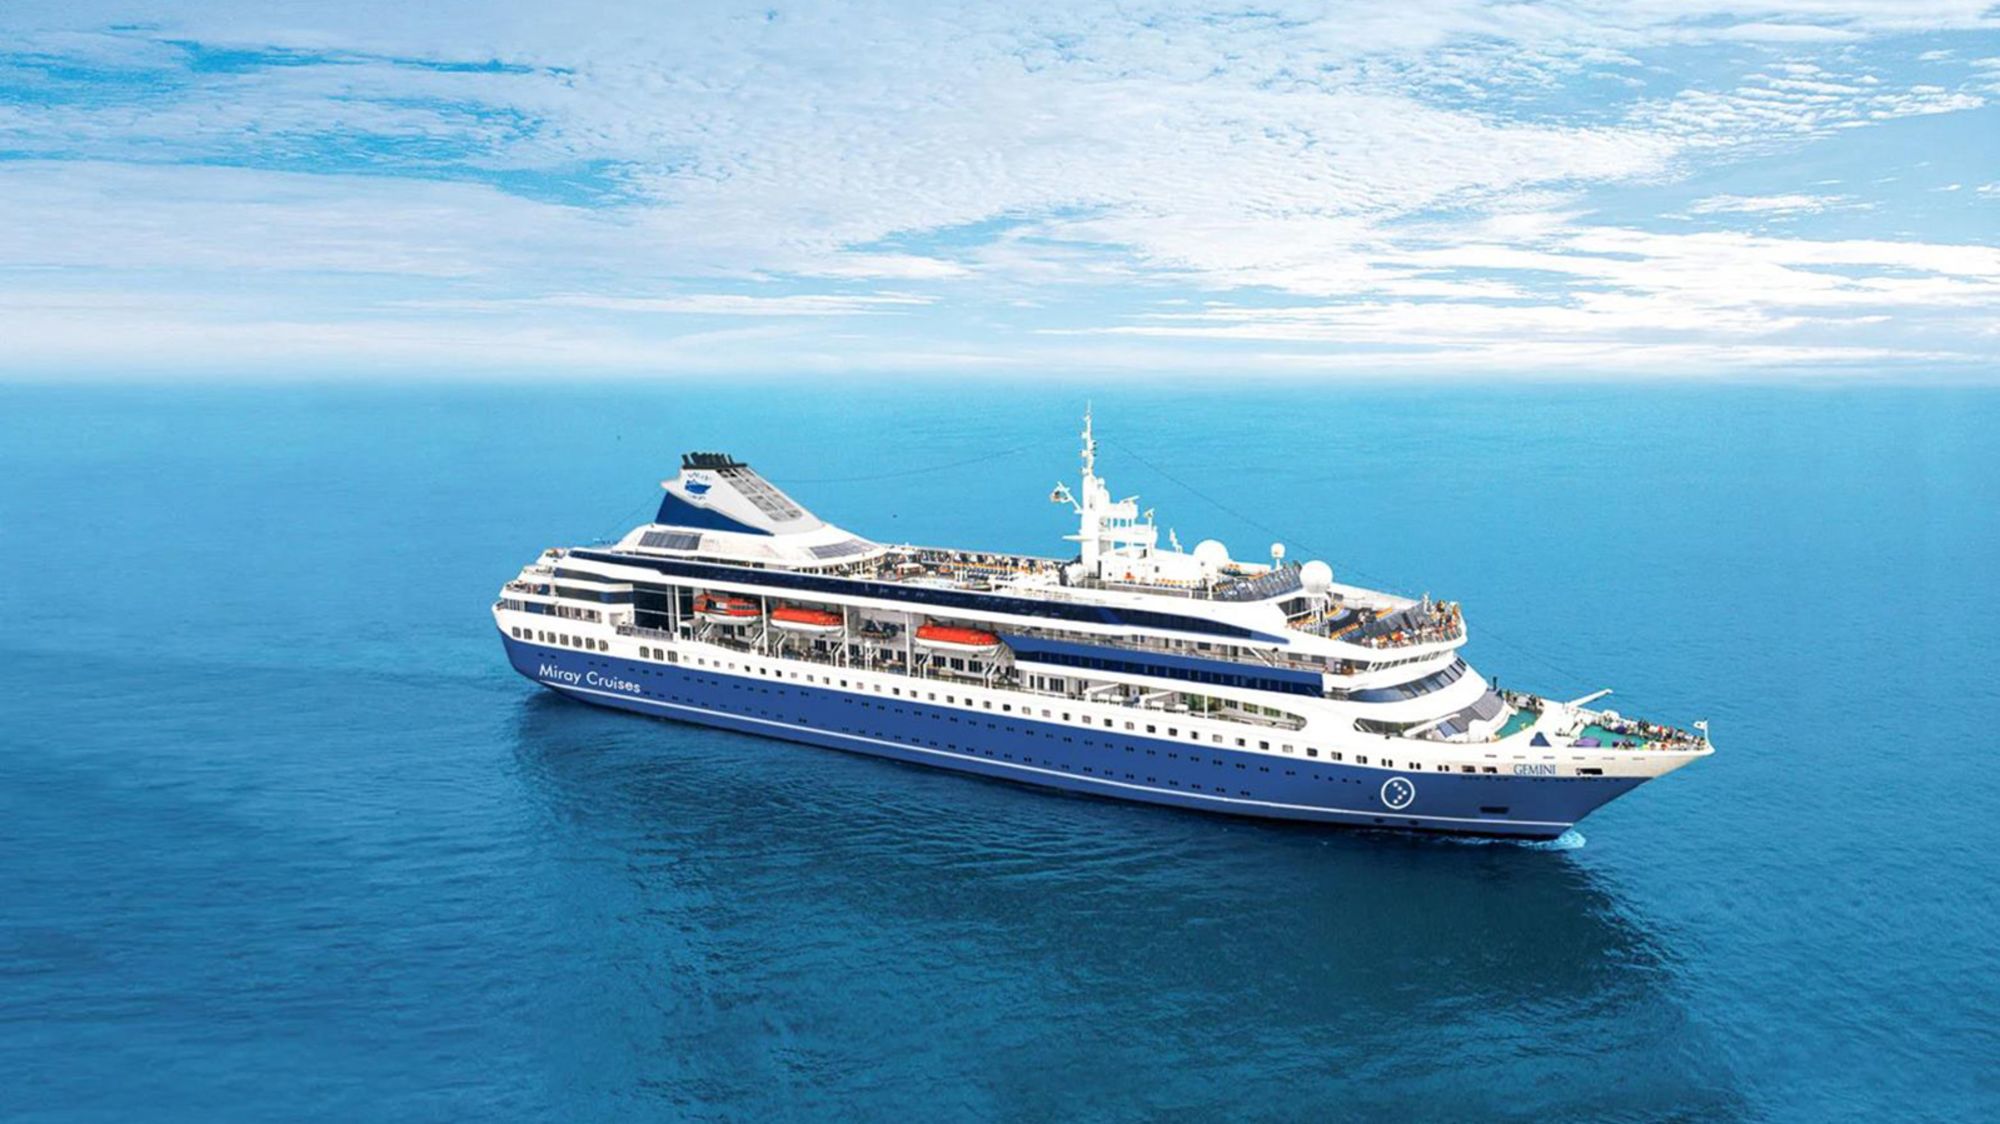 The "world's first – and only – three-year cruise” was scheduled to begin on MV Gemini, pictured in a rendered image, in November.